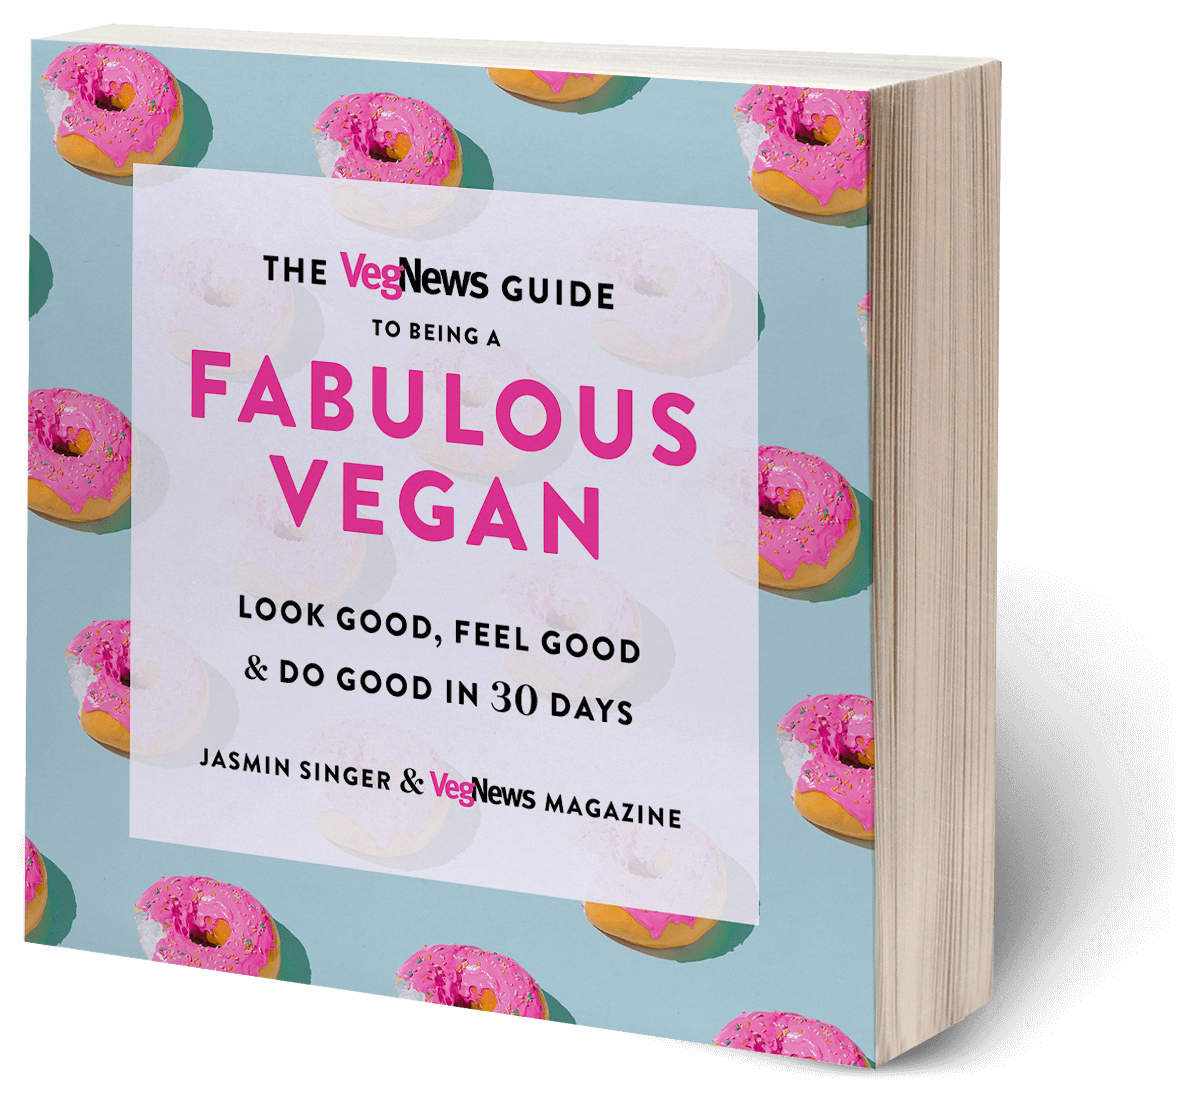 The VegNews Guide to Being a Fabulous Vegan Look Good, Feel Good, & Do Good in 30 Days